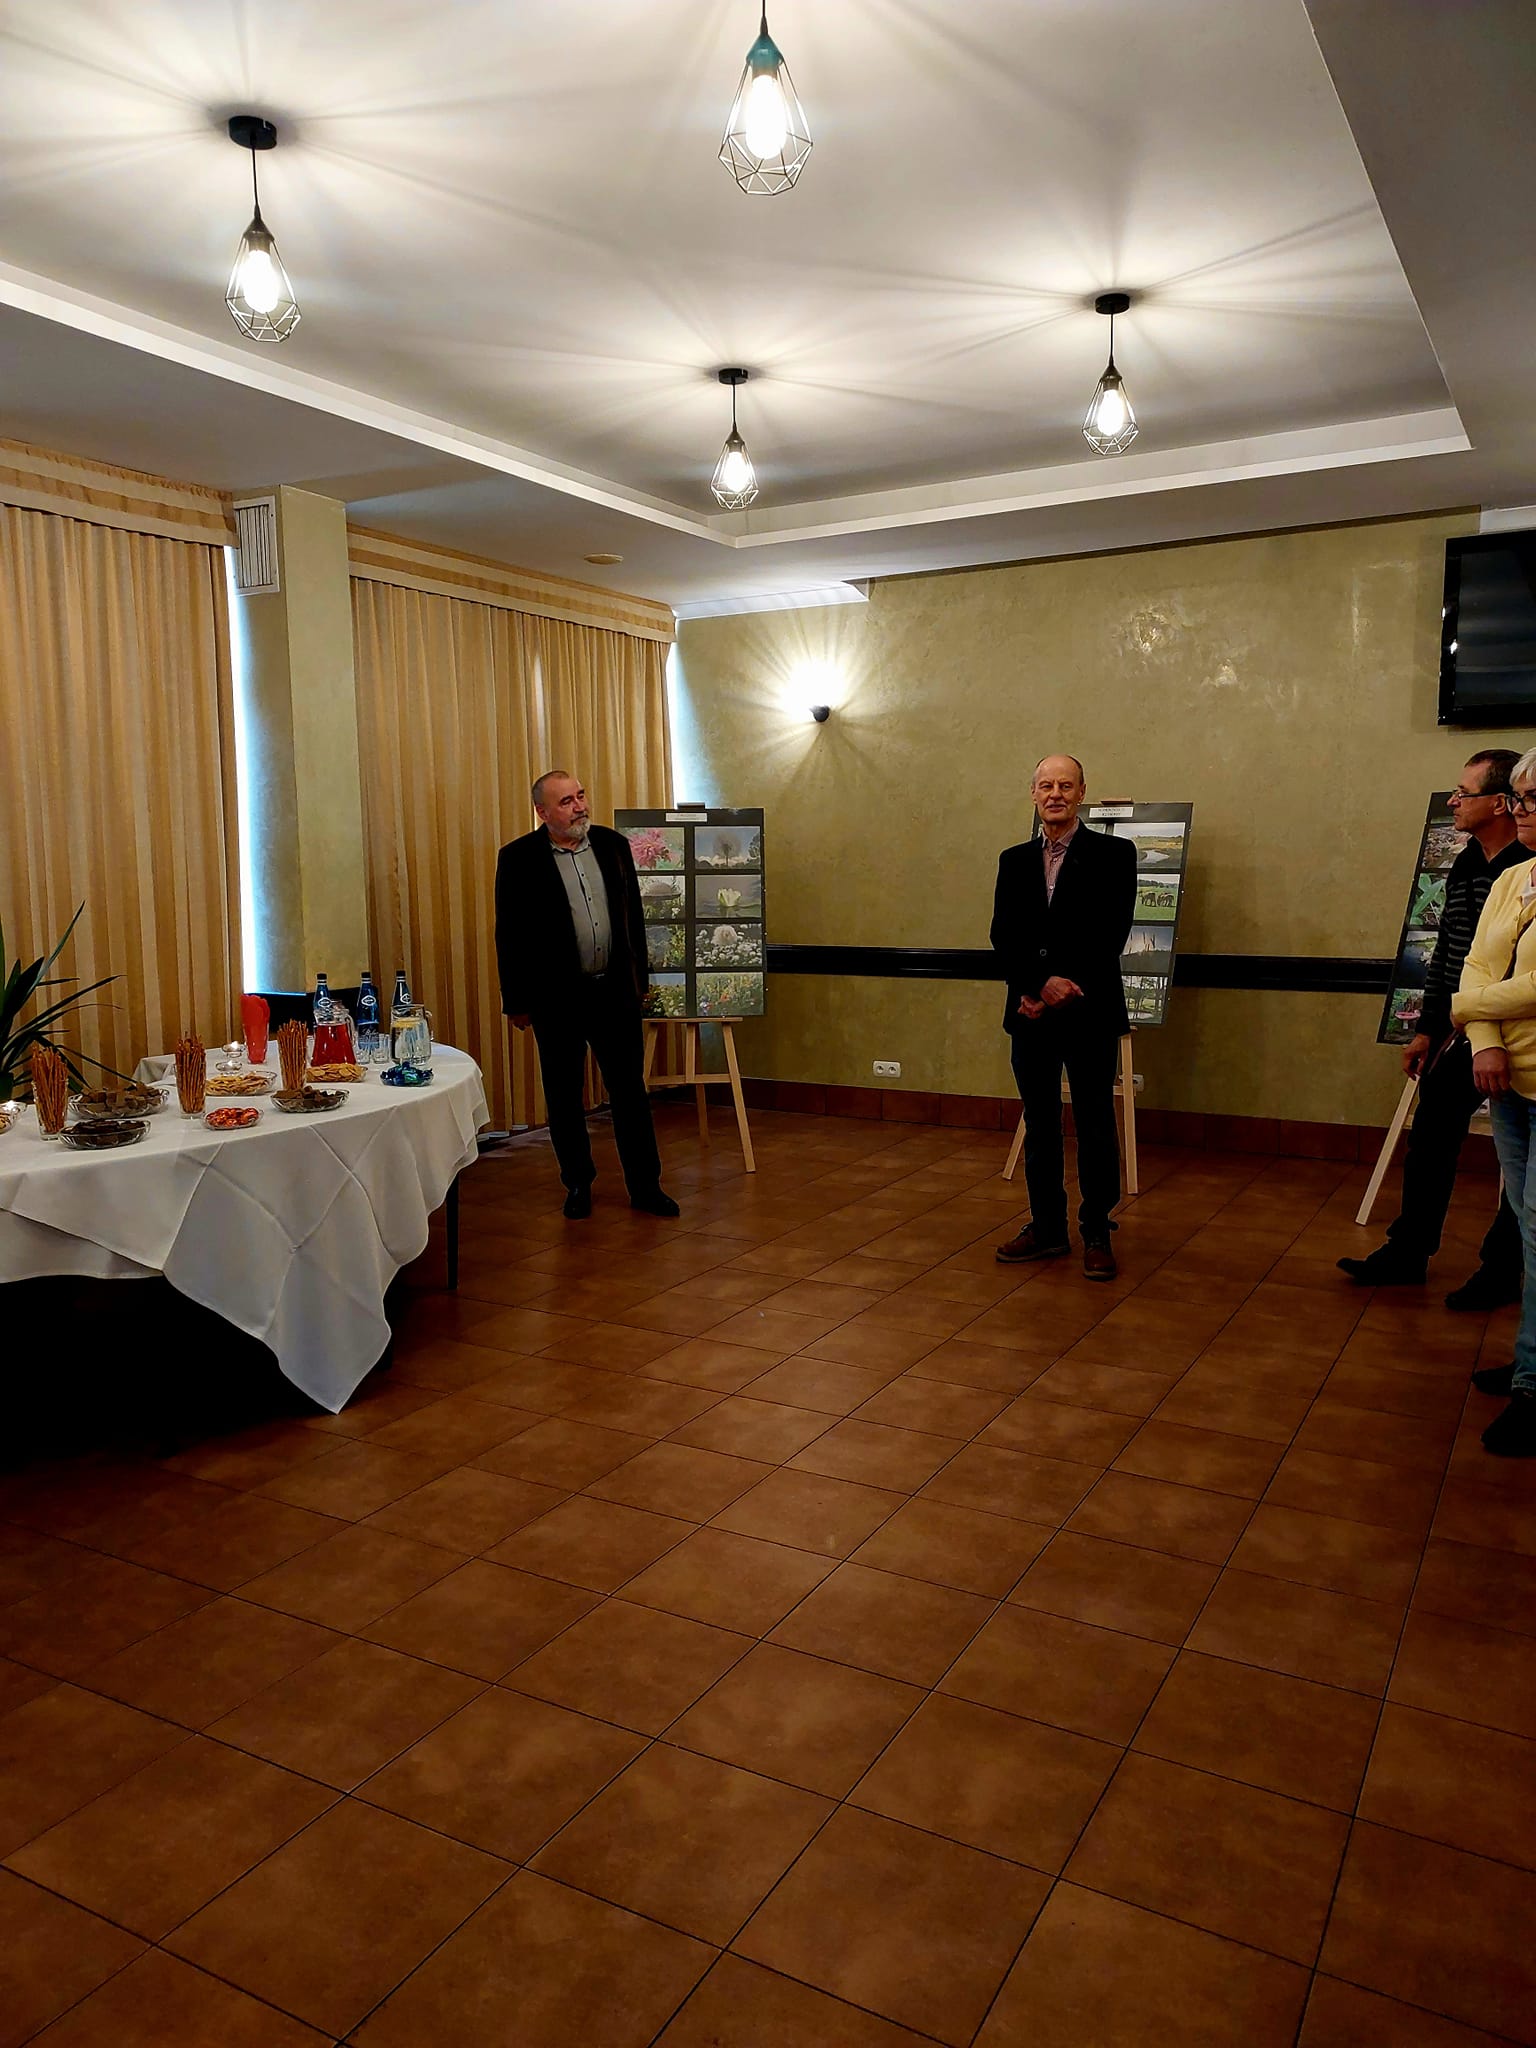 Official opening of the photo exhibition by Mr. Director Przemysław Bonk and the author - Mr. Wojciech Bartosik.